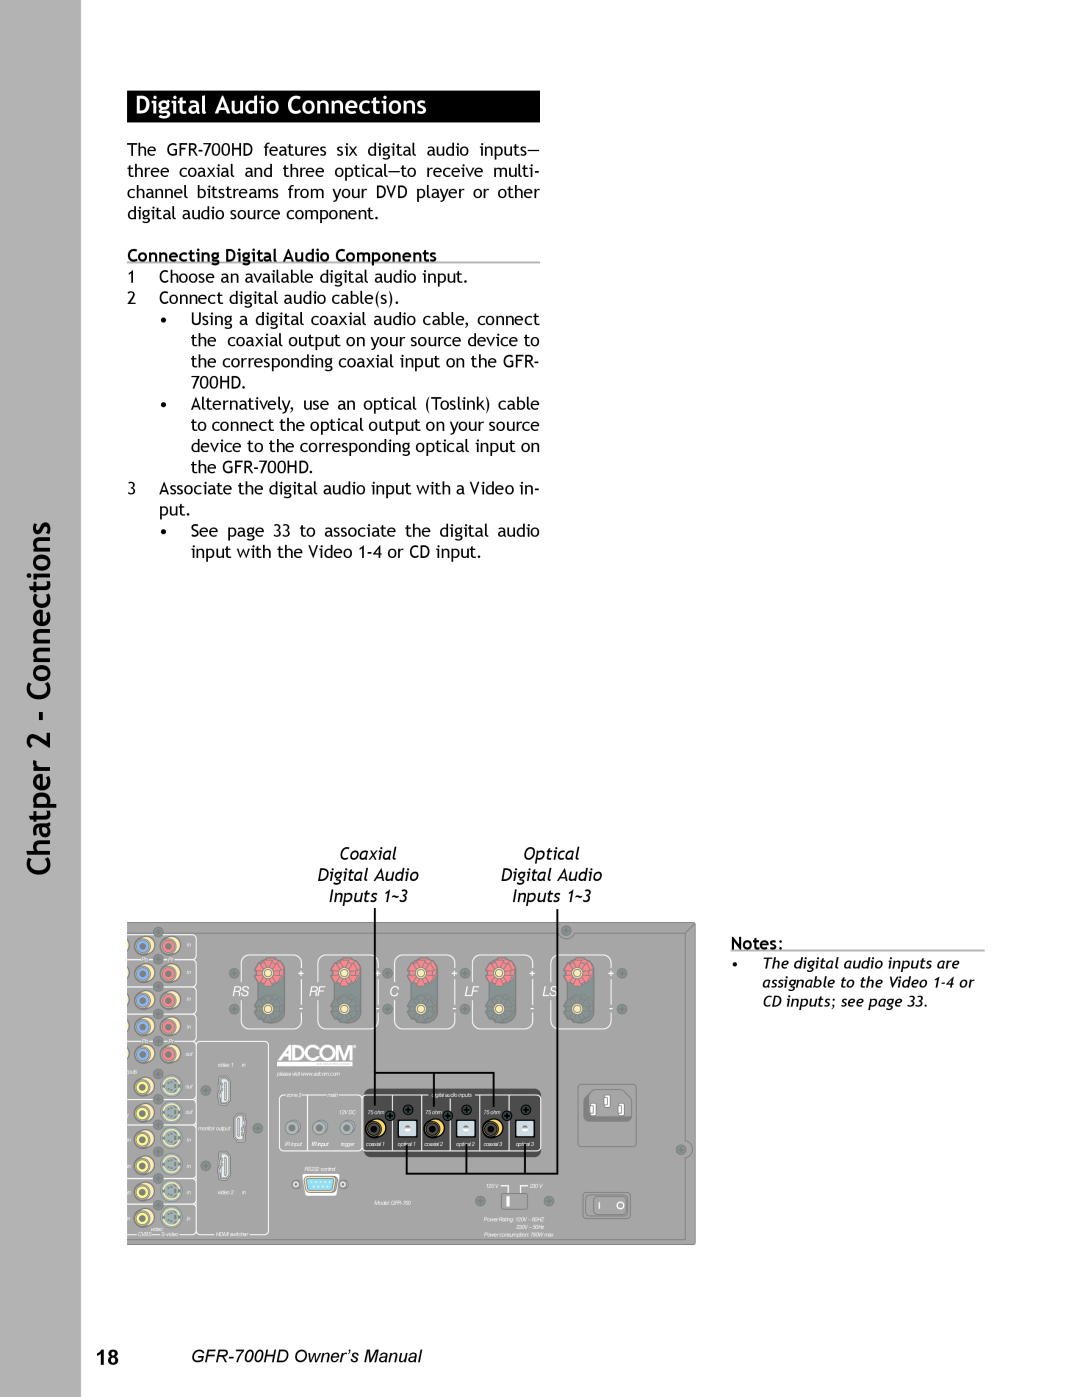 Adcom GFR-700HD Digital Audio Connections, Connecting Digital Audio Components, Coaxial, Optical, Chatper 2 - Connections 